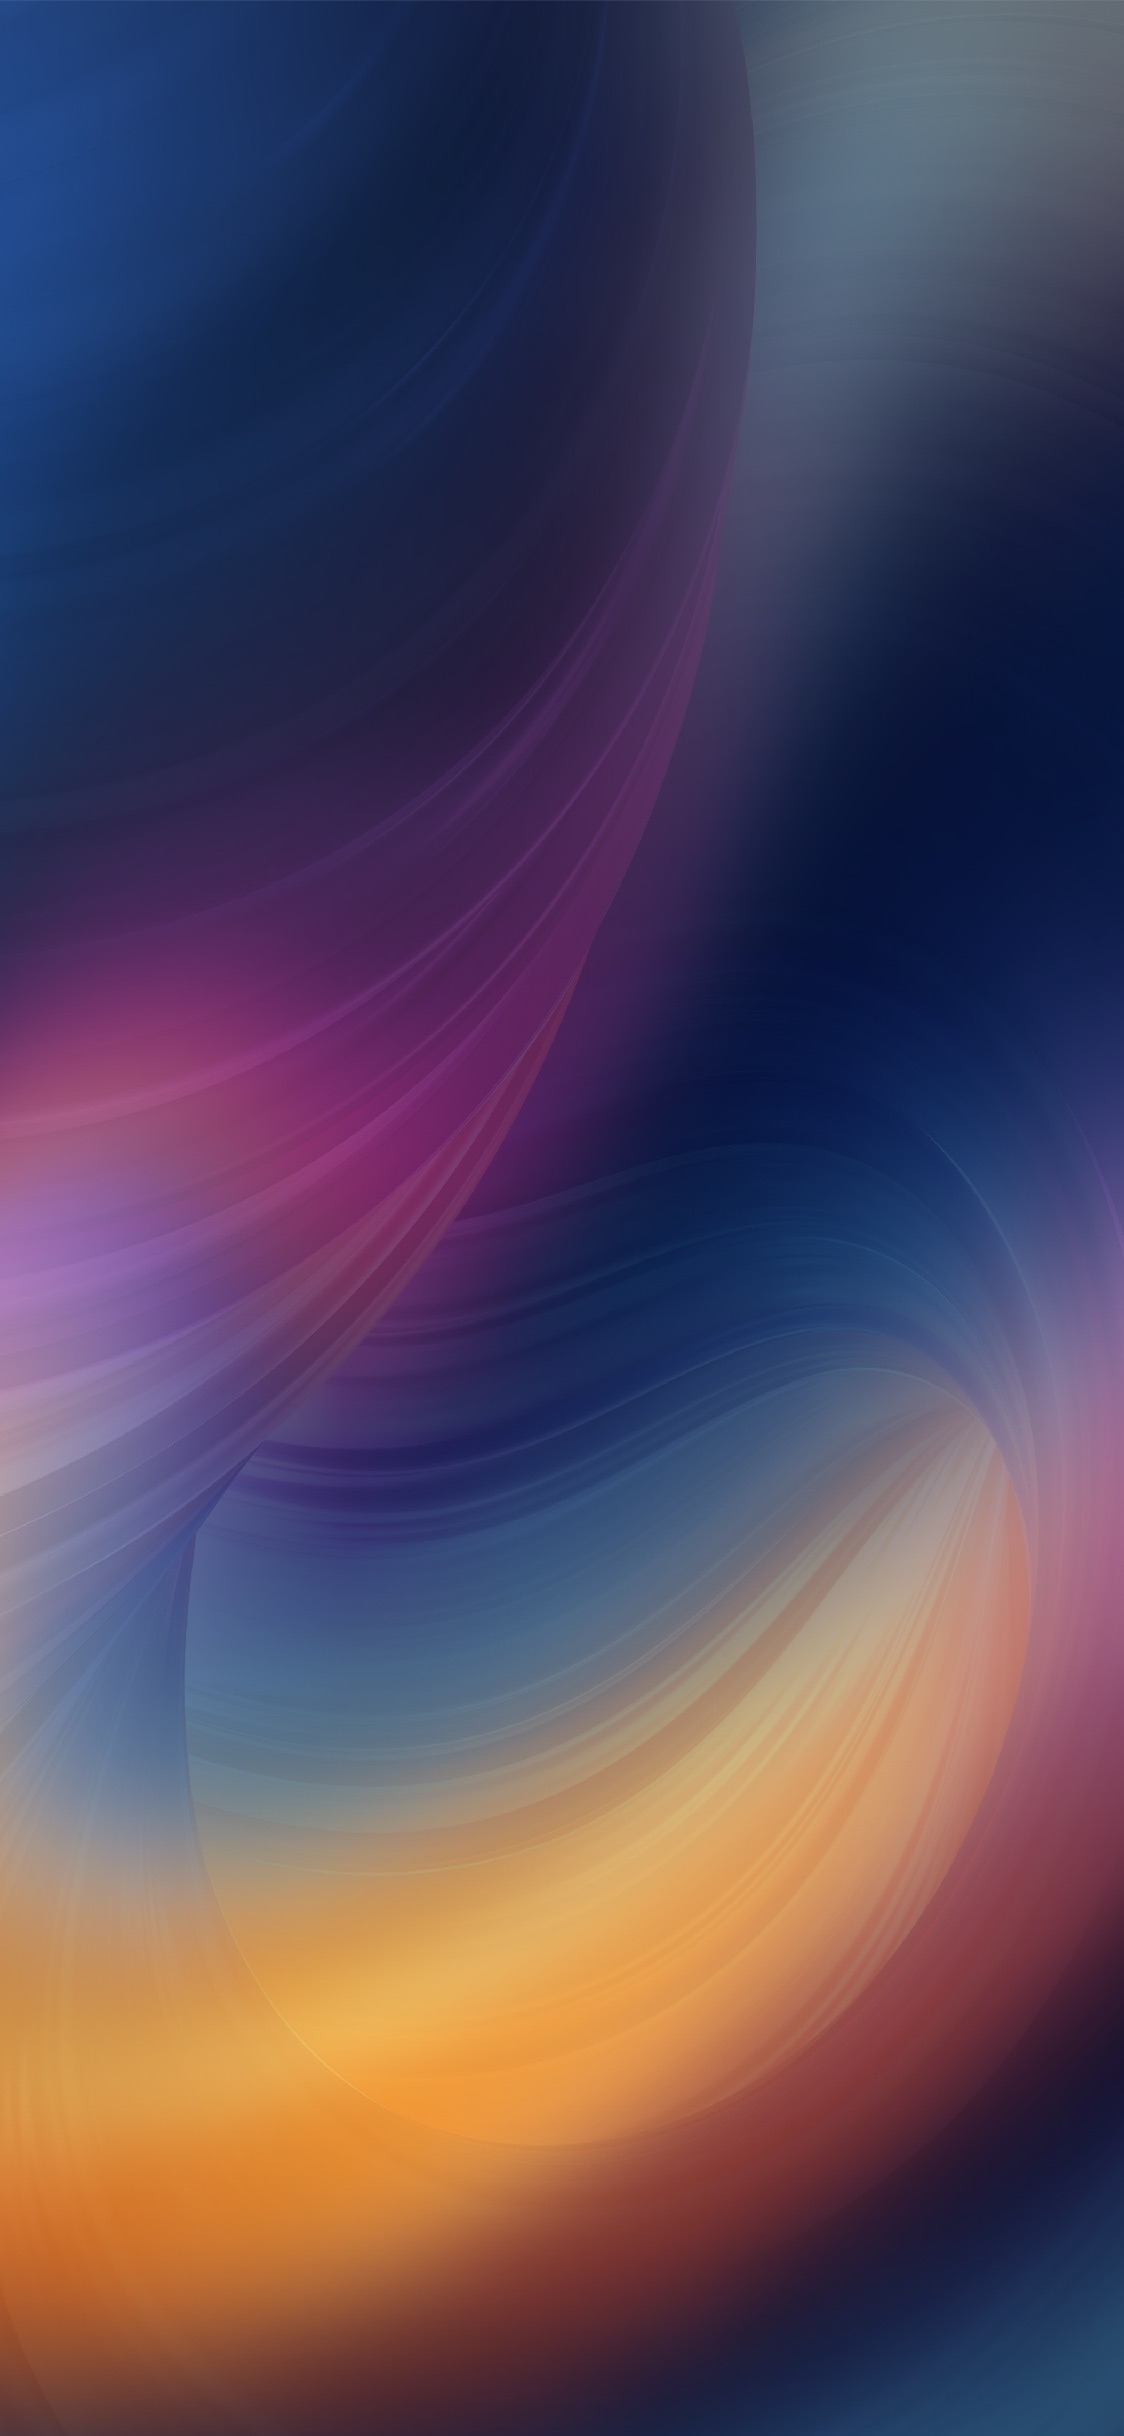 Wallpaper Of The Week Abstract Shapes And Colors